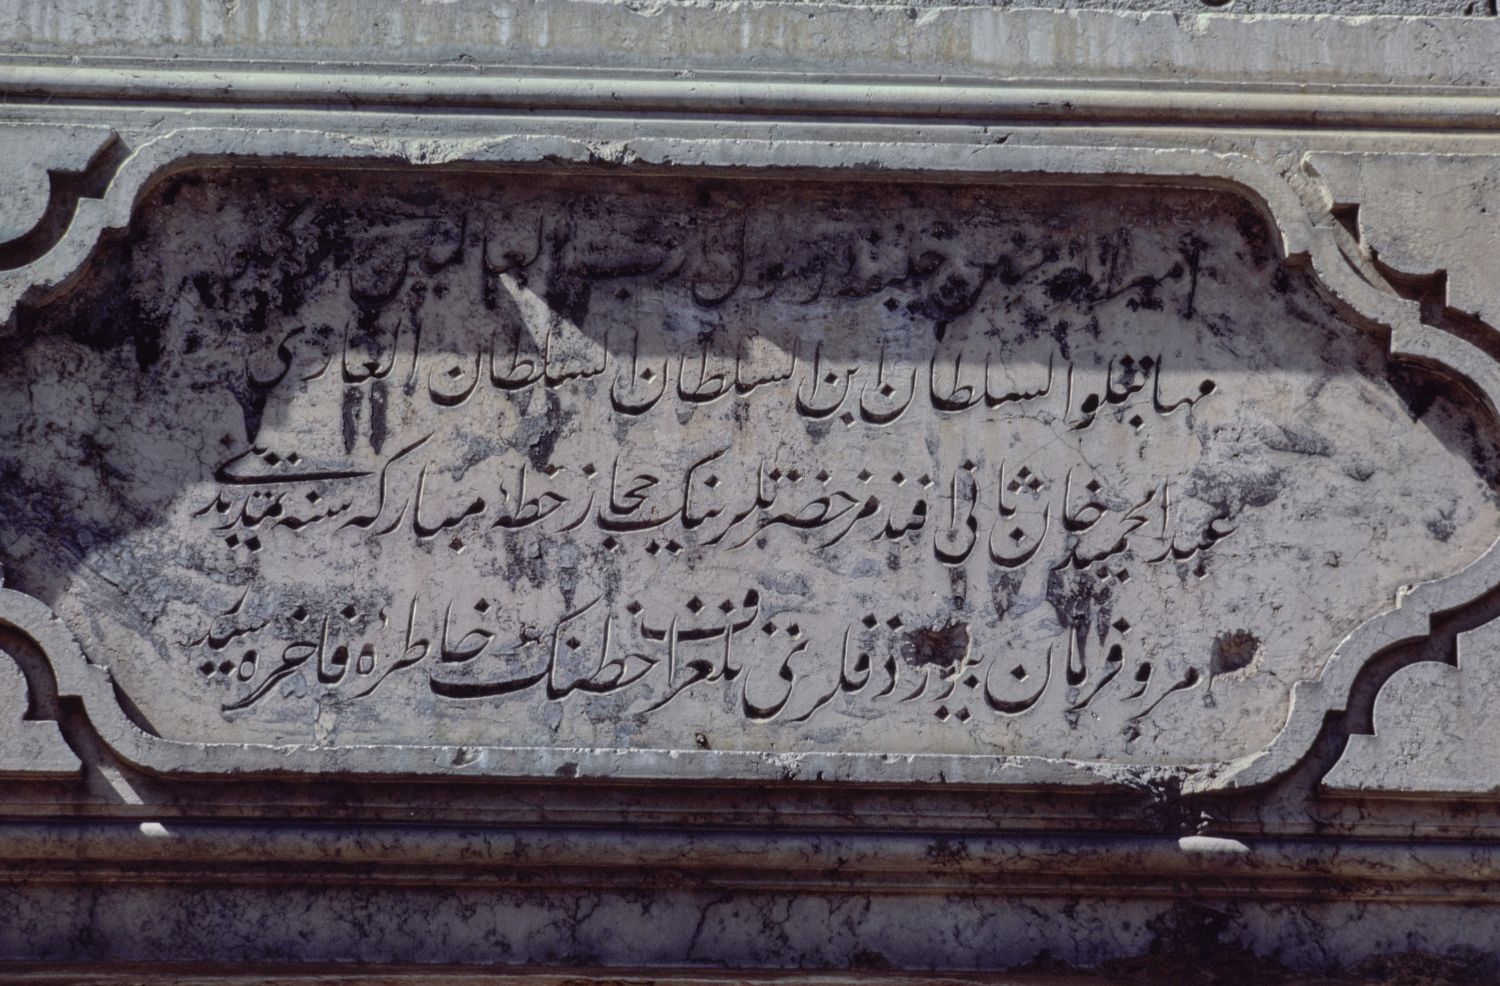 View of inscription.